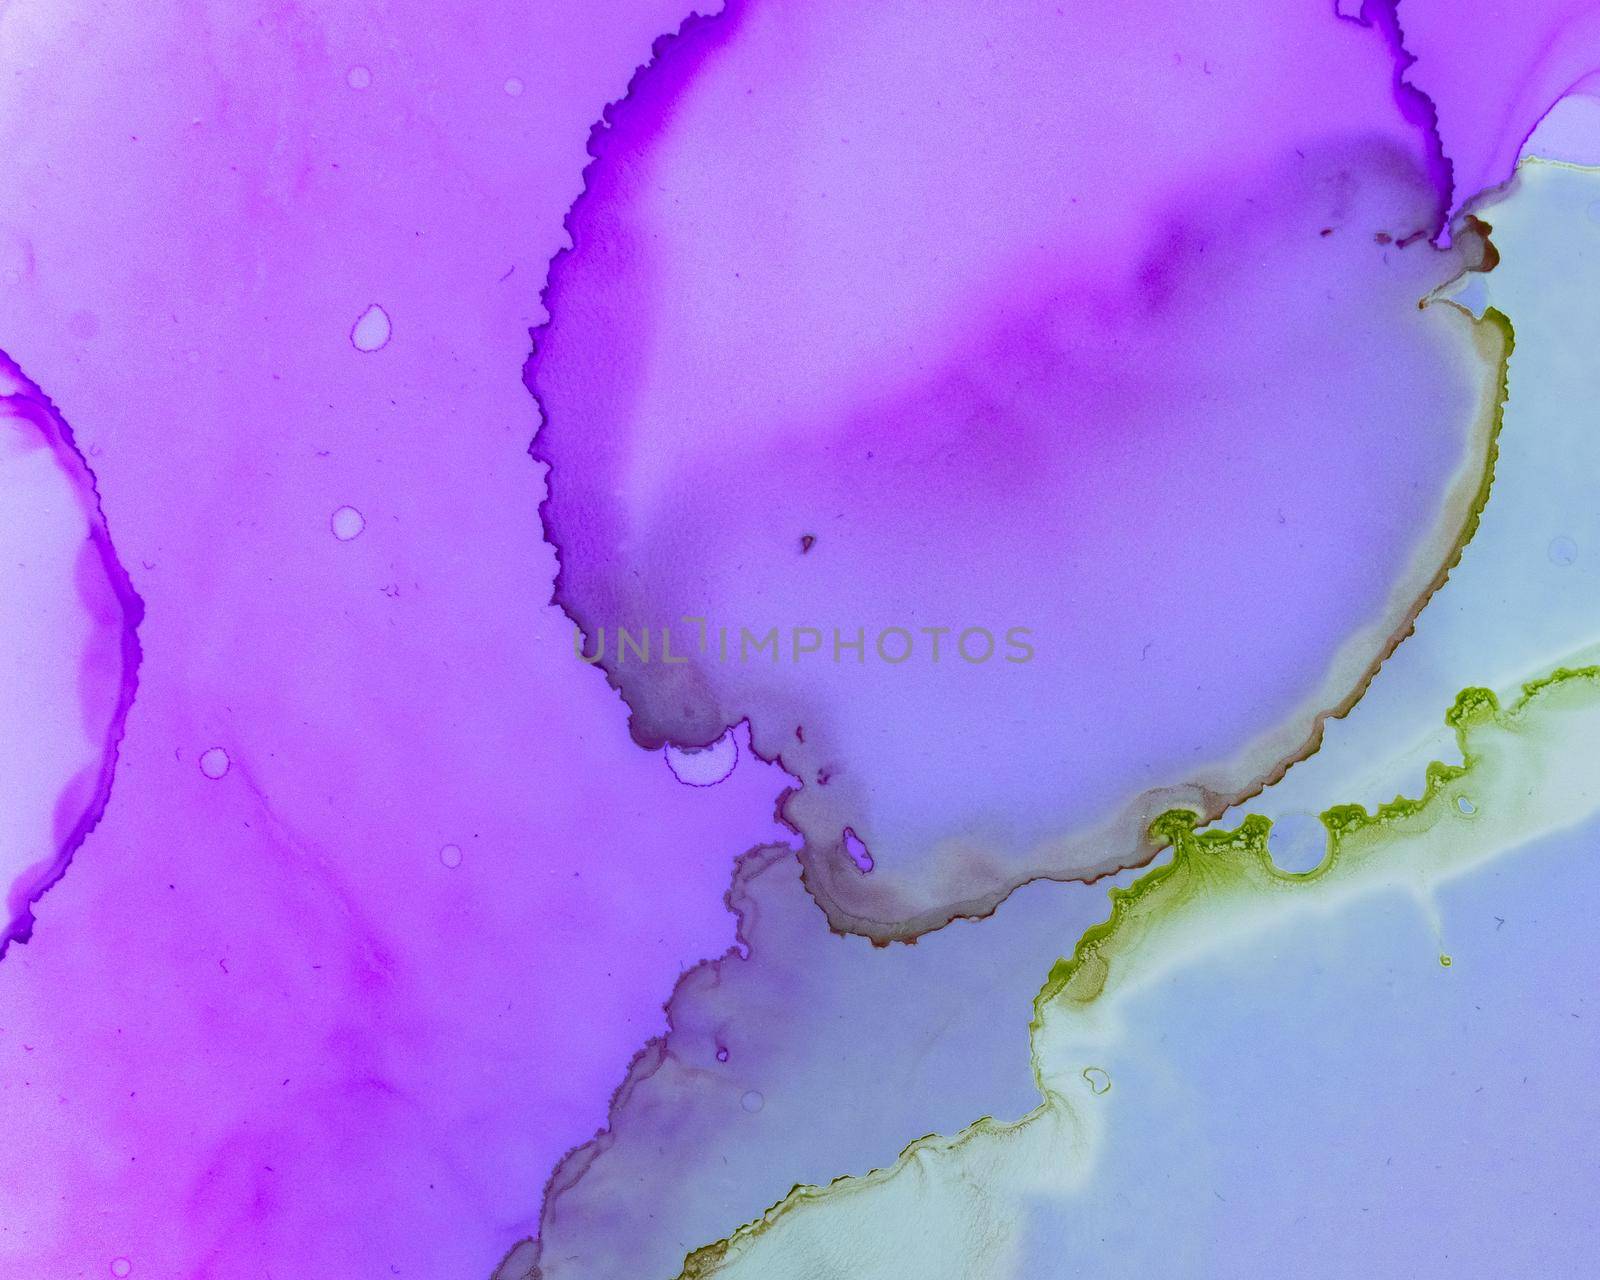 Ethereal Art Texture. Liquid Ink Wash Wallpaper. Pink Modern Spots Splash. Alcohol Inks Color Design. Ethereal Water Pattern. Alcohol Ink Wave Background. Mauve Ethereal Water Texture.